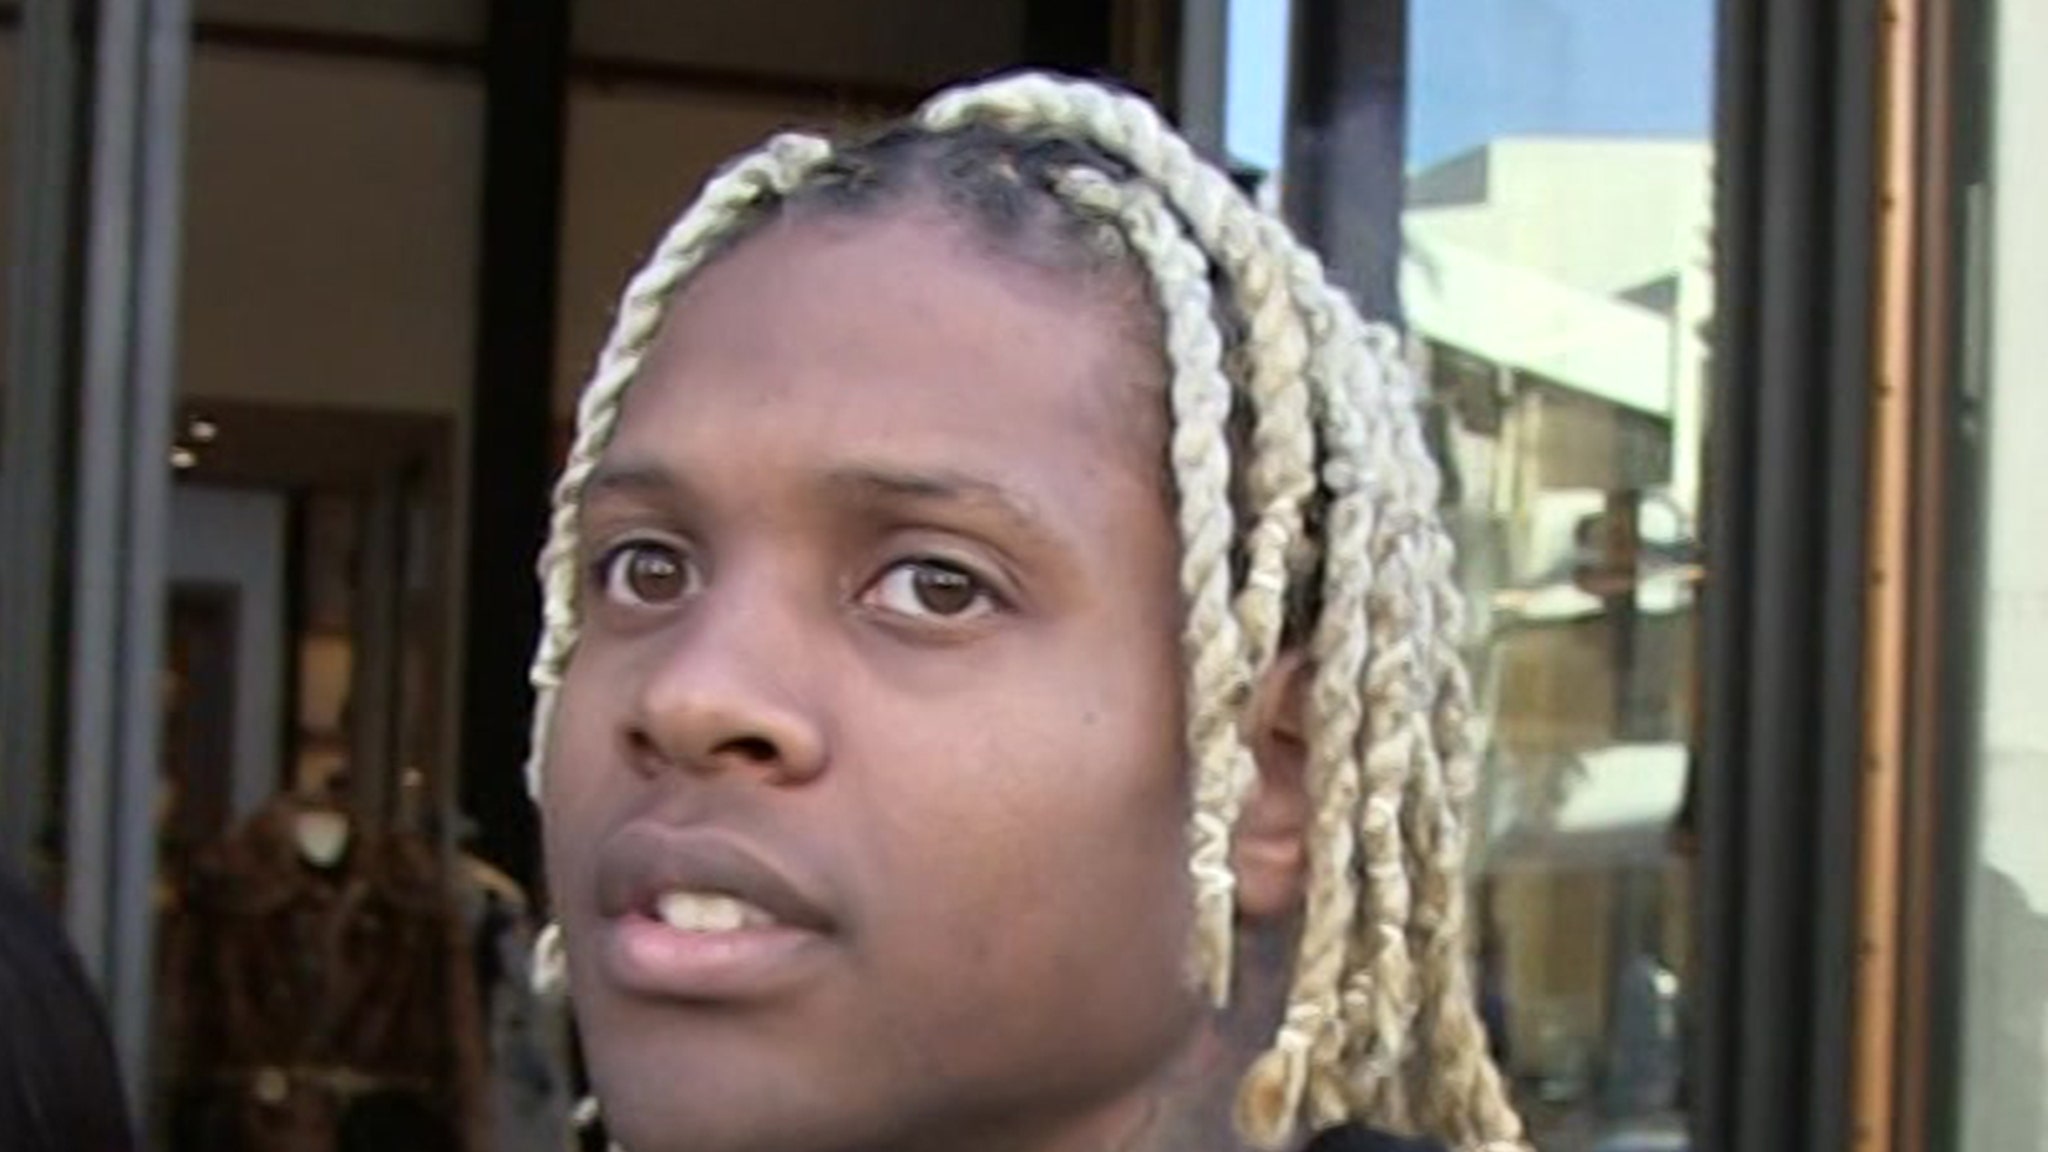 Lil Durk’s concert ends early after people think they hear gunshots